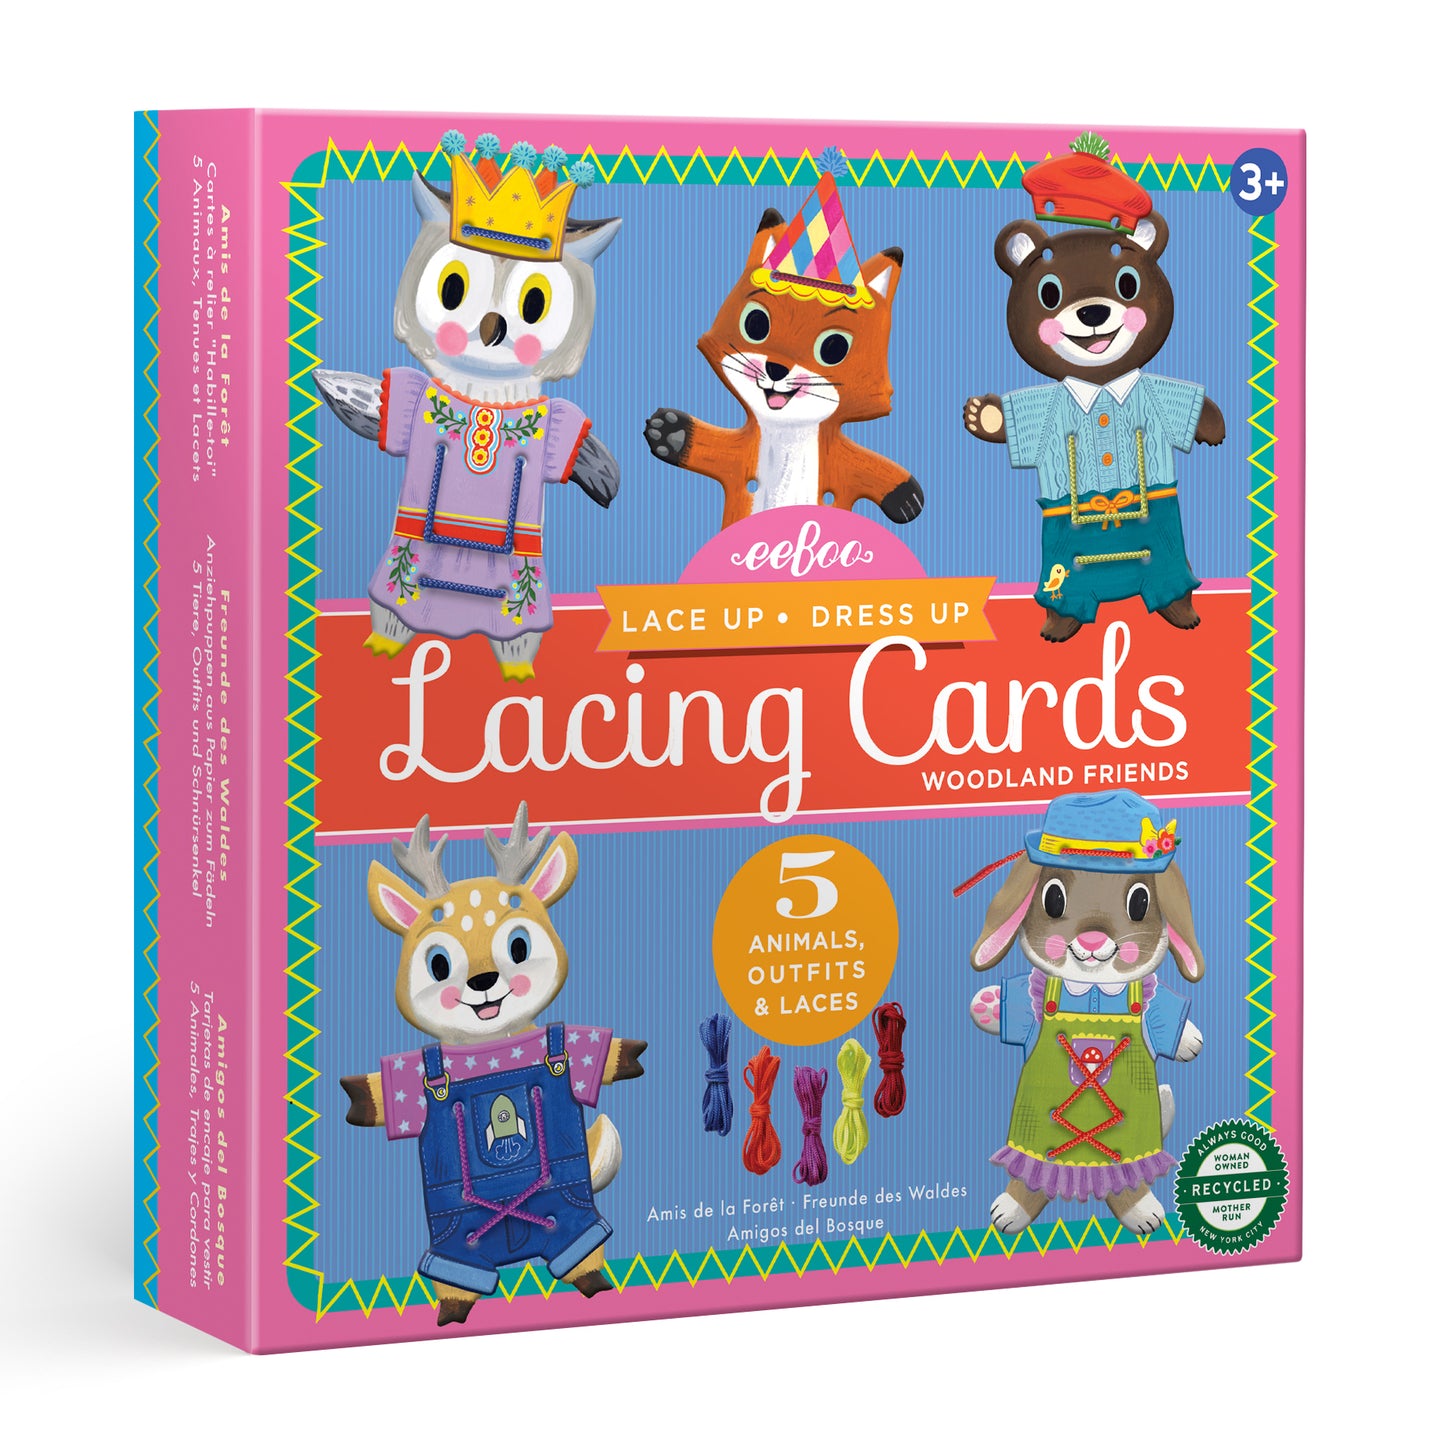 Woodland Friends Dress Up Lacing Card | Unique FunGifts for Kids Ages 3+ | Develops Hand Eye Coordination